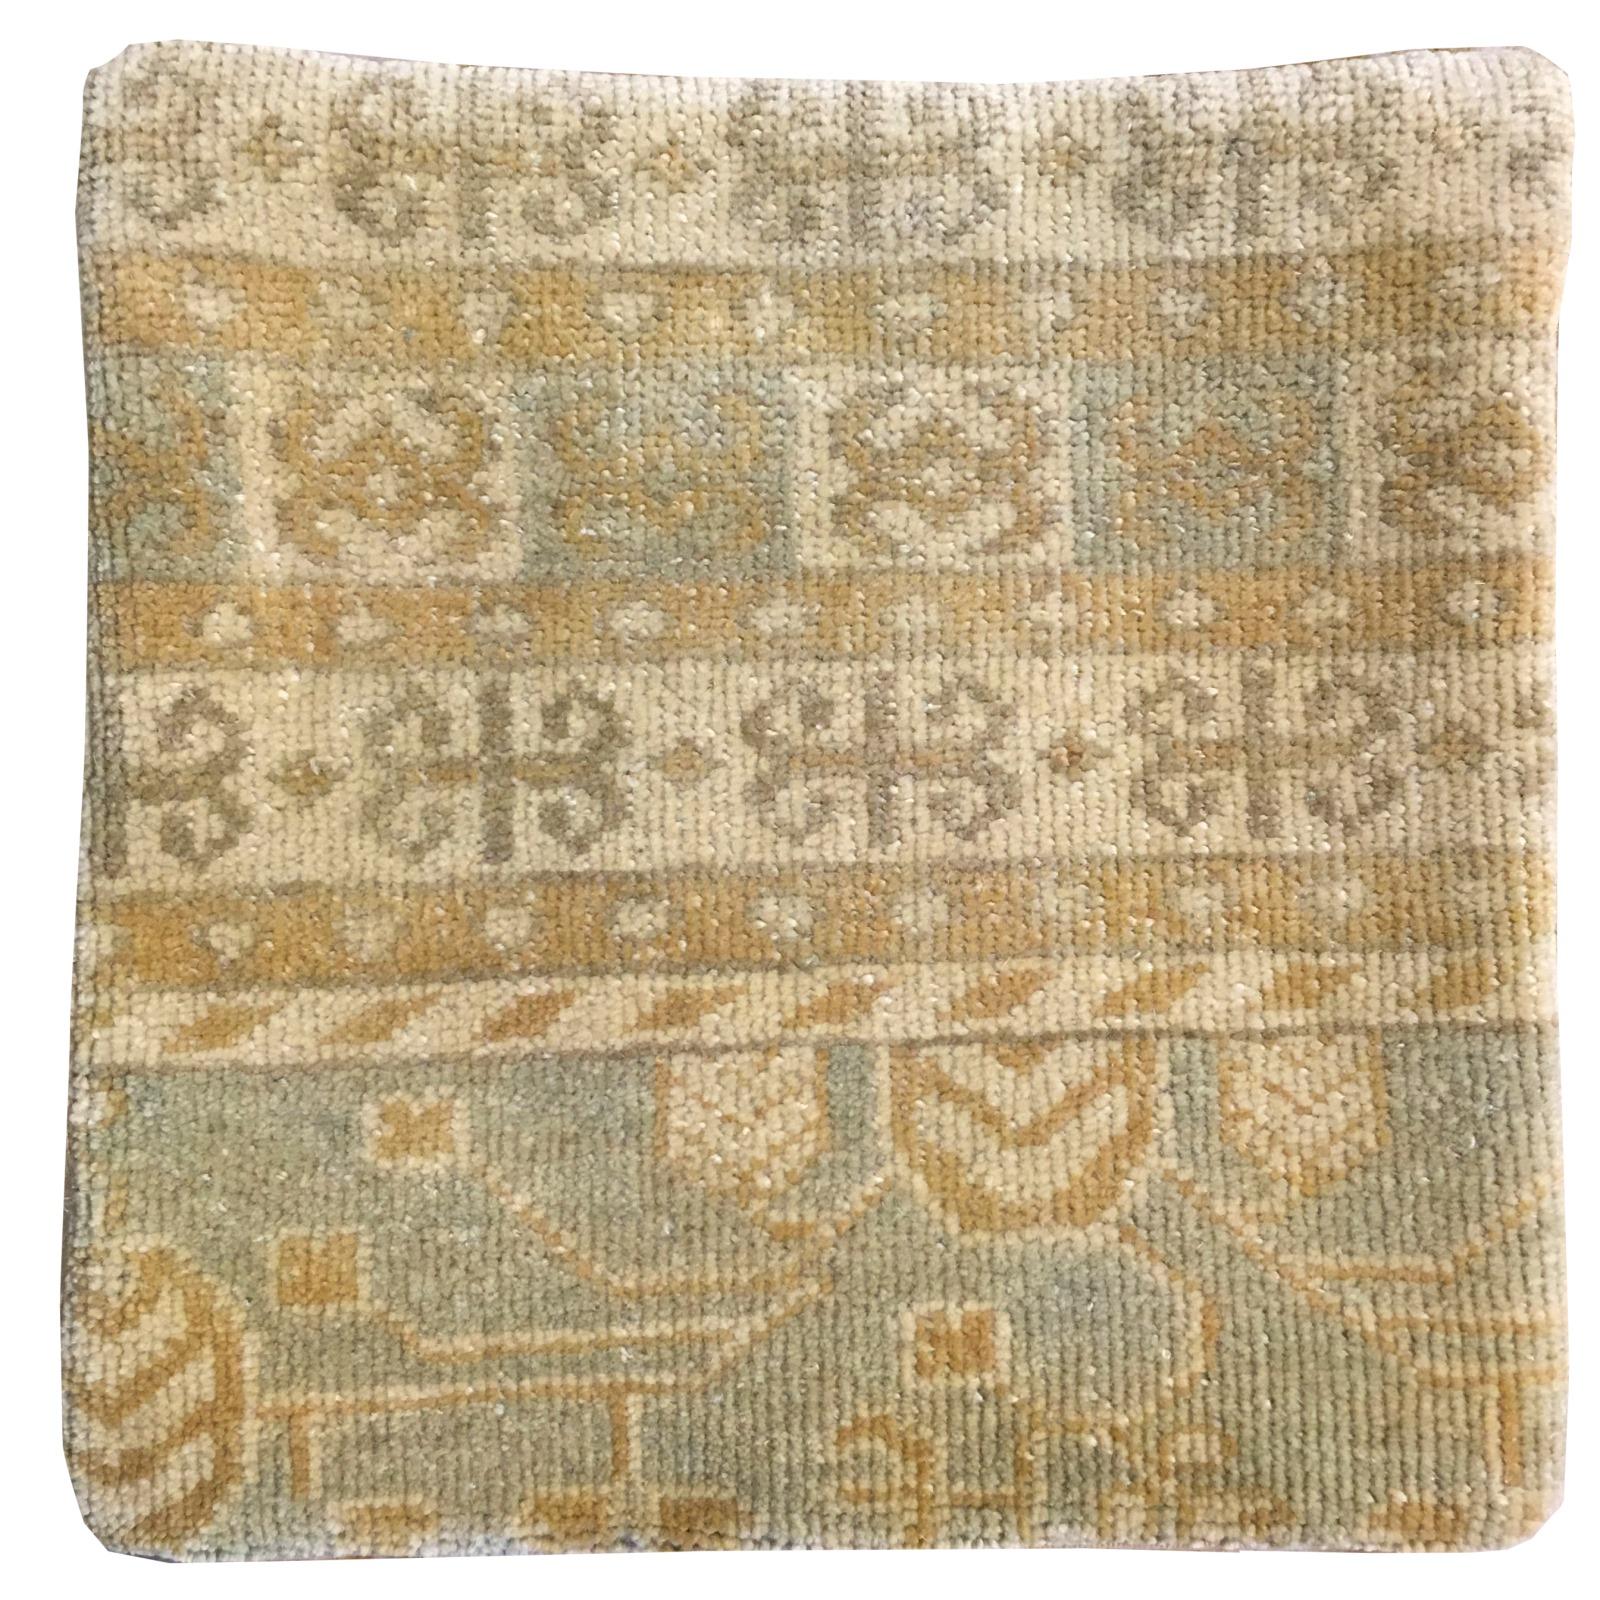 Khotan Samarkand Decorative Hand-Knotted Rug Pillow Cover For Sale